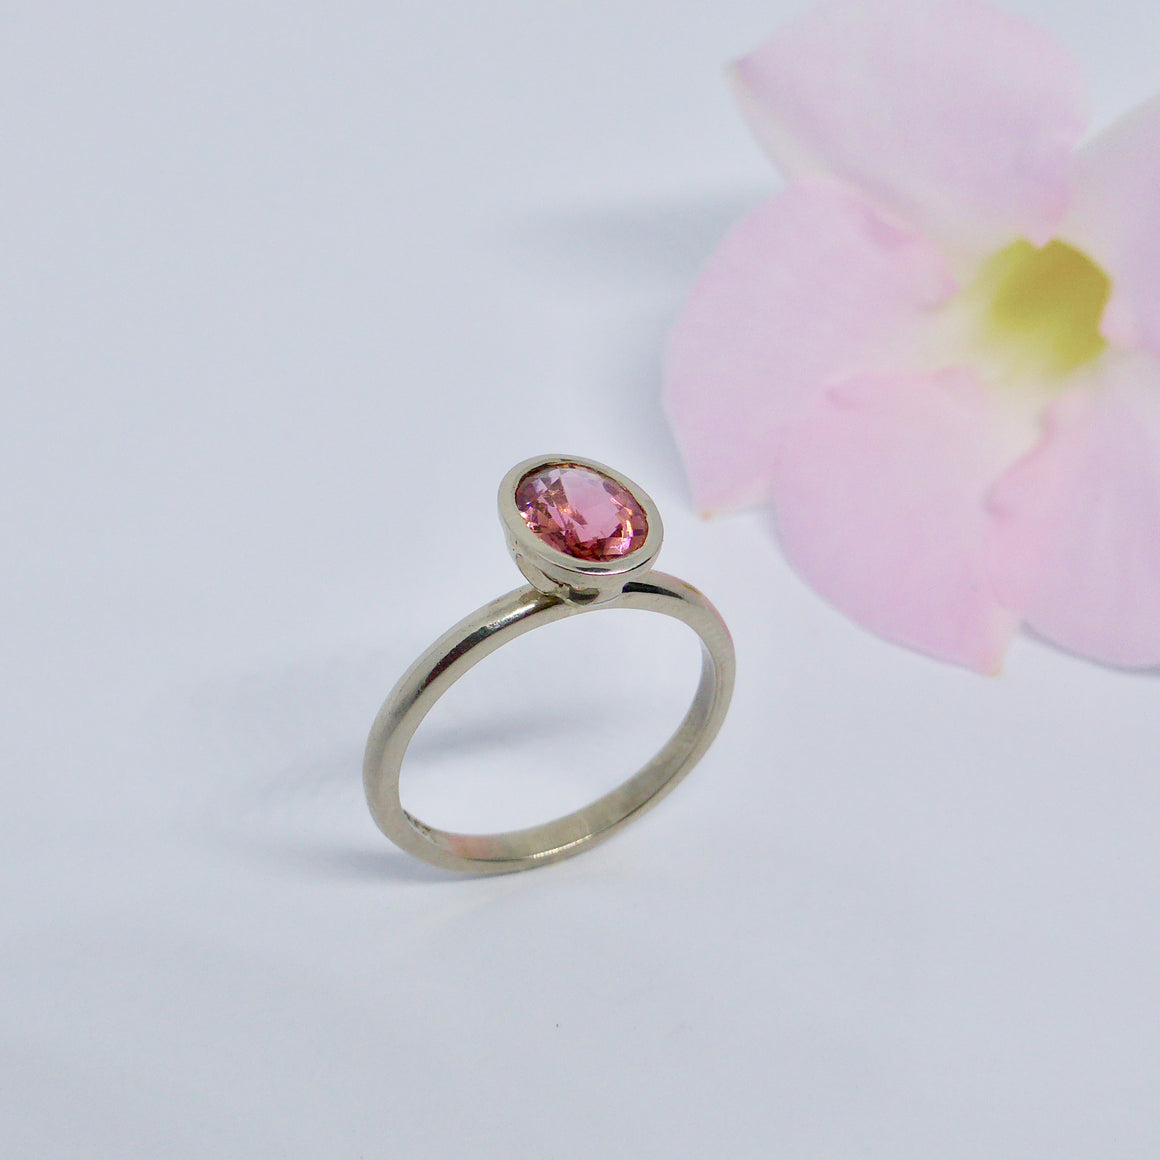 Solitaire pink tourmaline ring